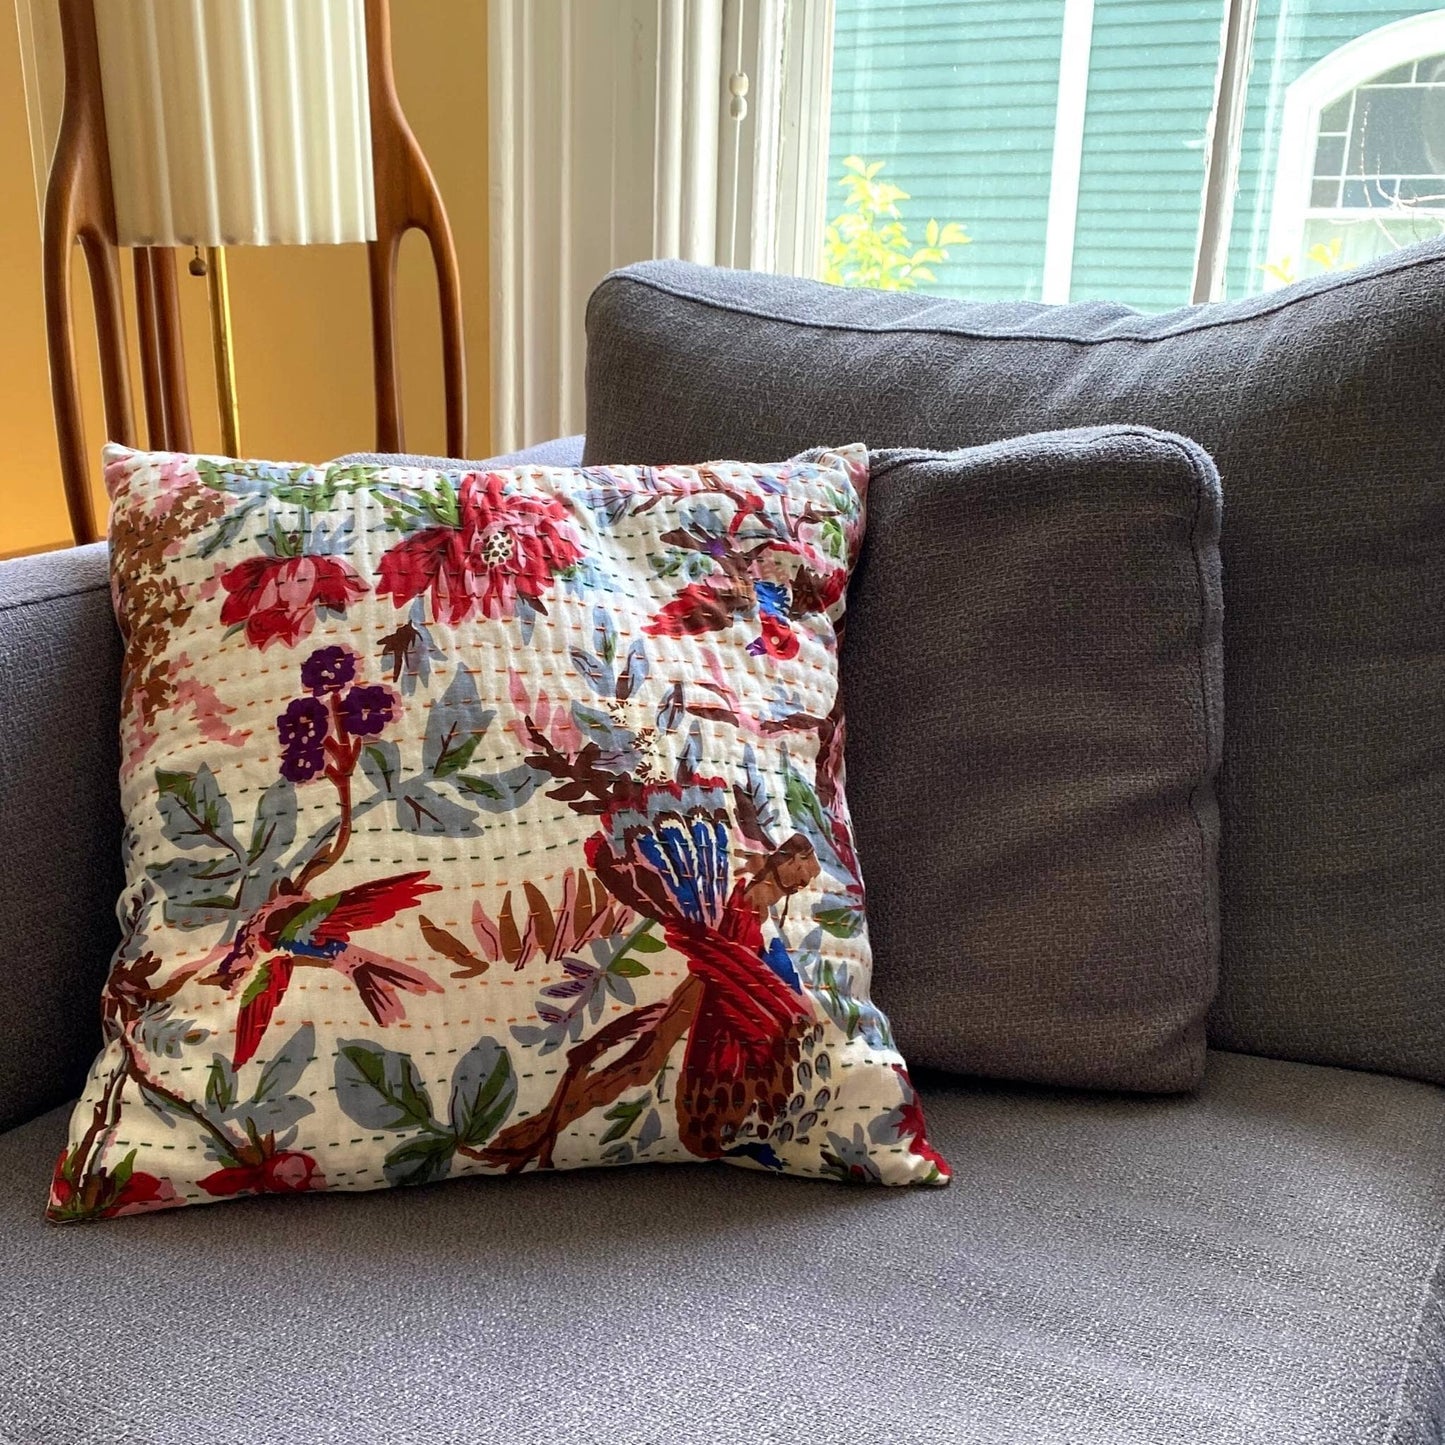 Vibrant Rainforest kantha pillow laying on a grey couch.